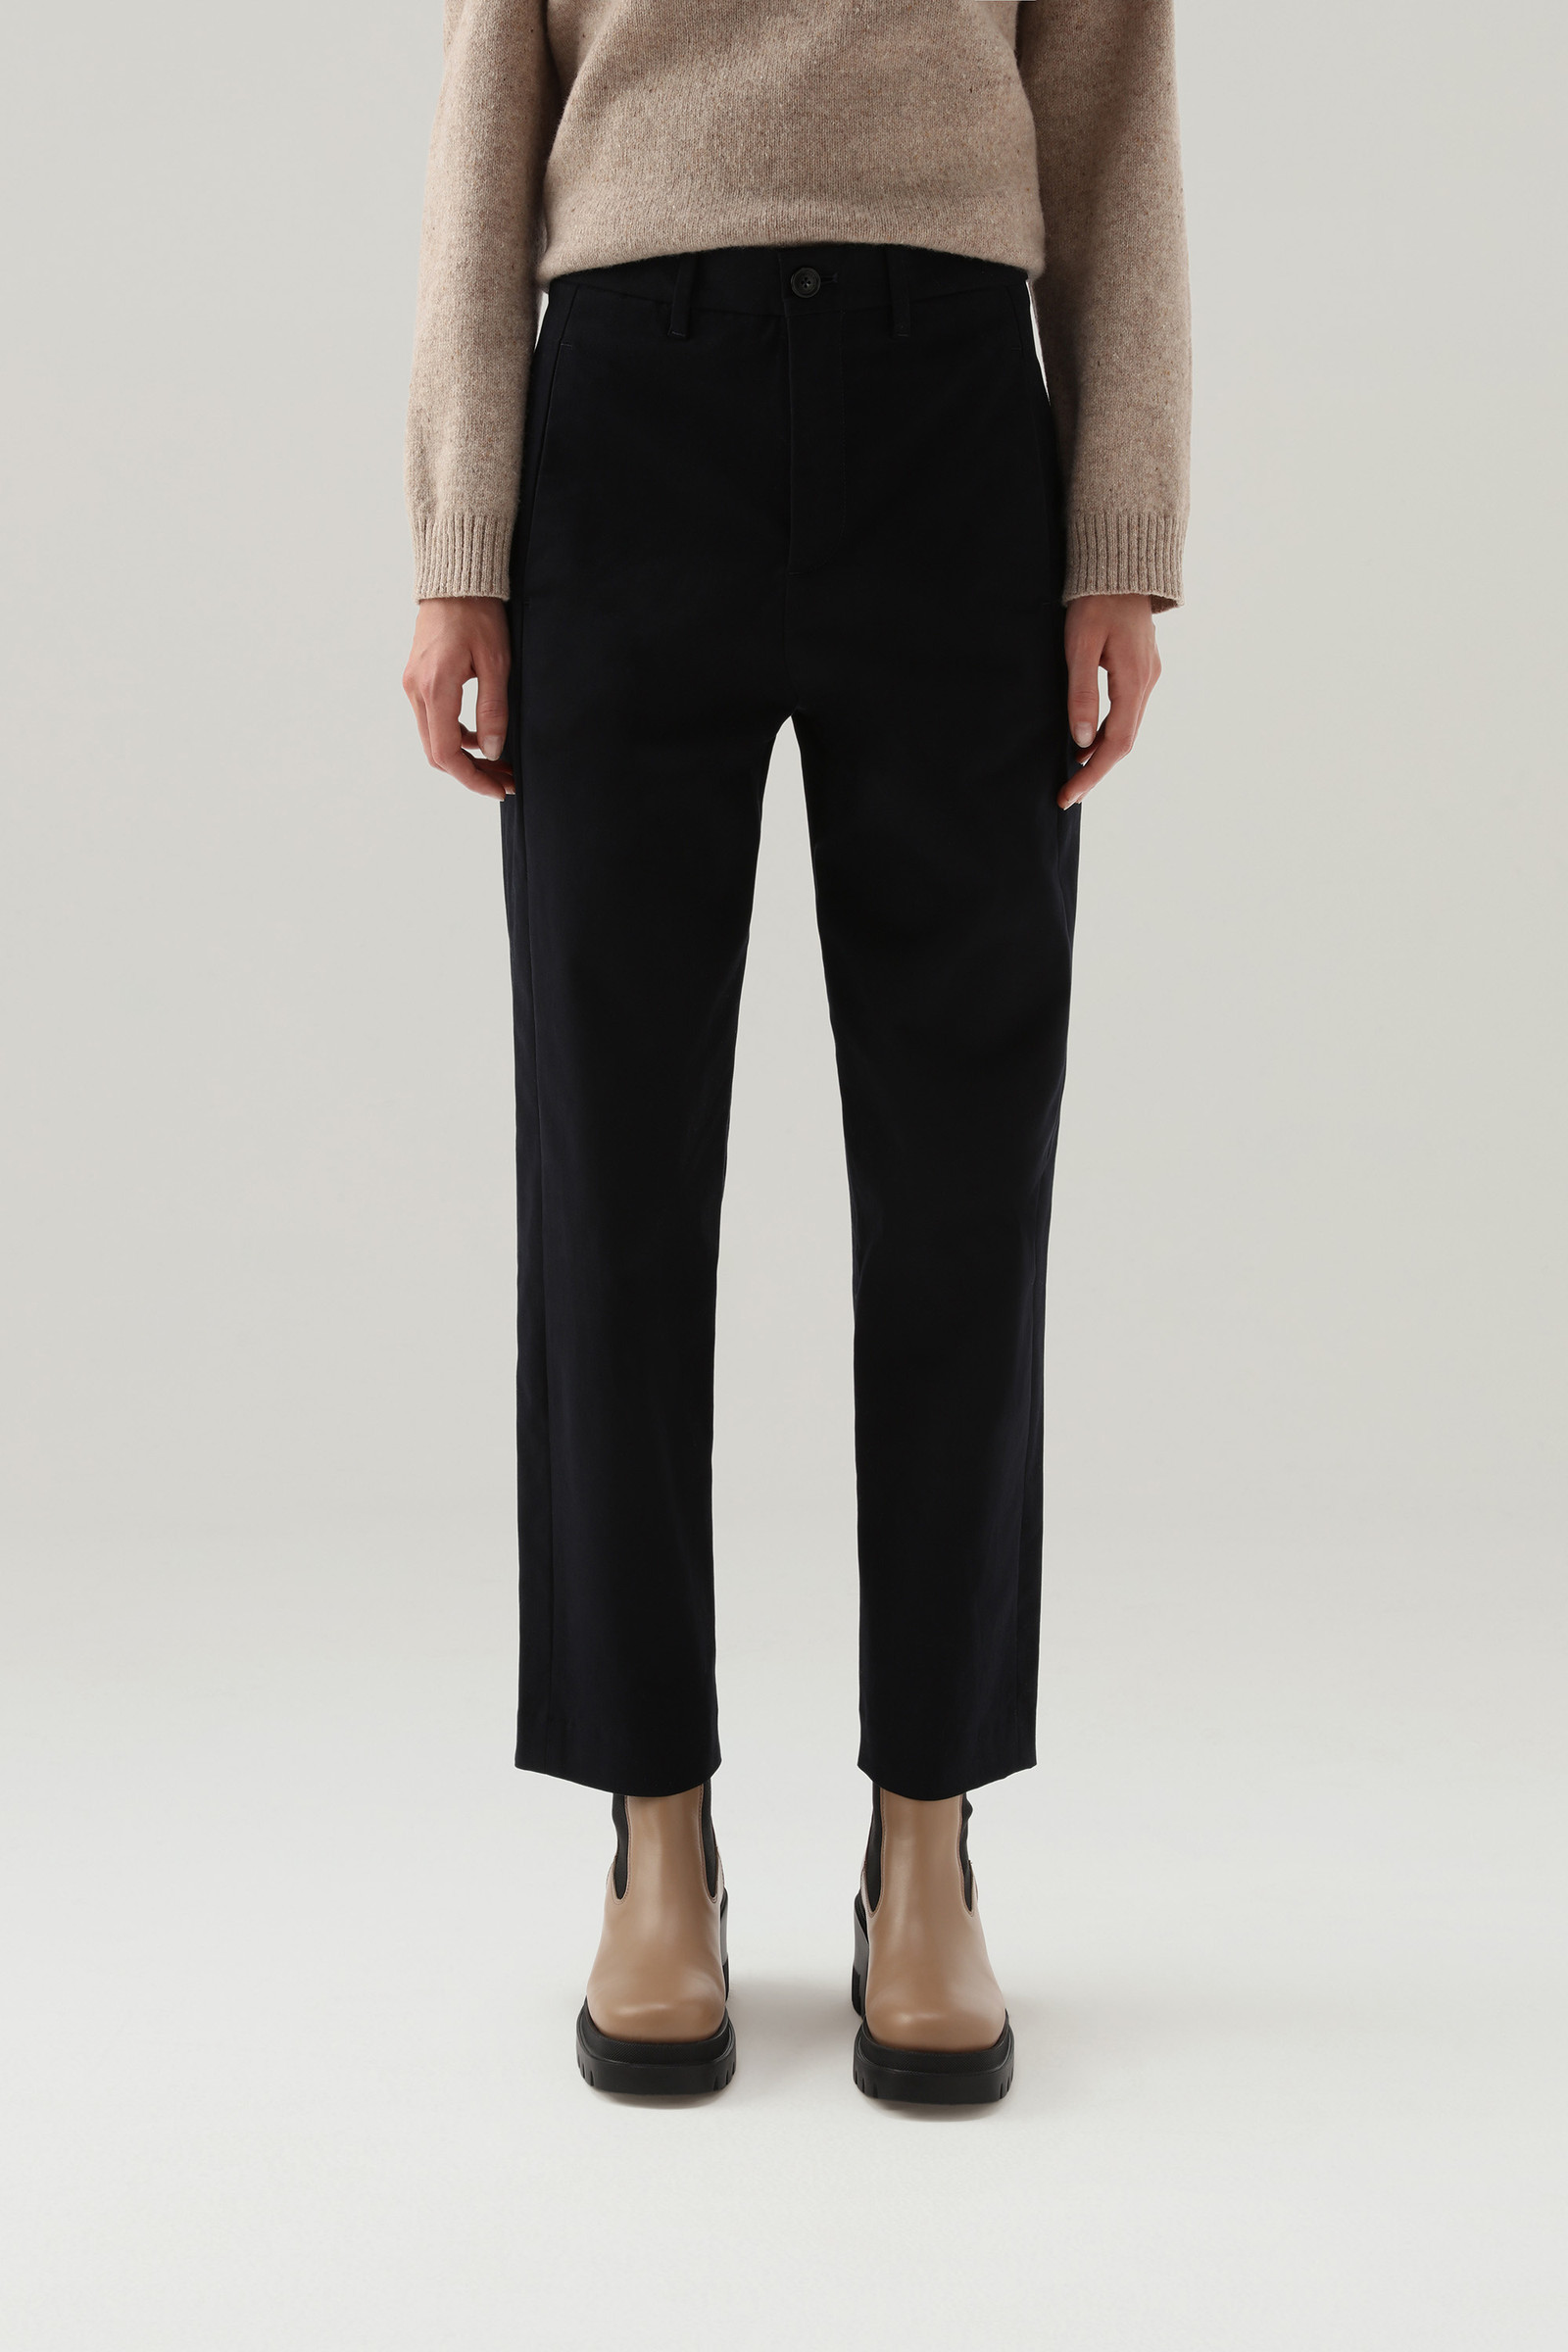 Cotton Twill Pant - Toast Pigment | James Perse Los Angeles